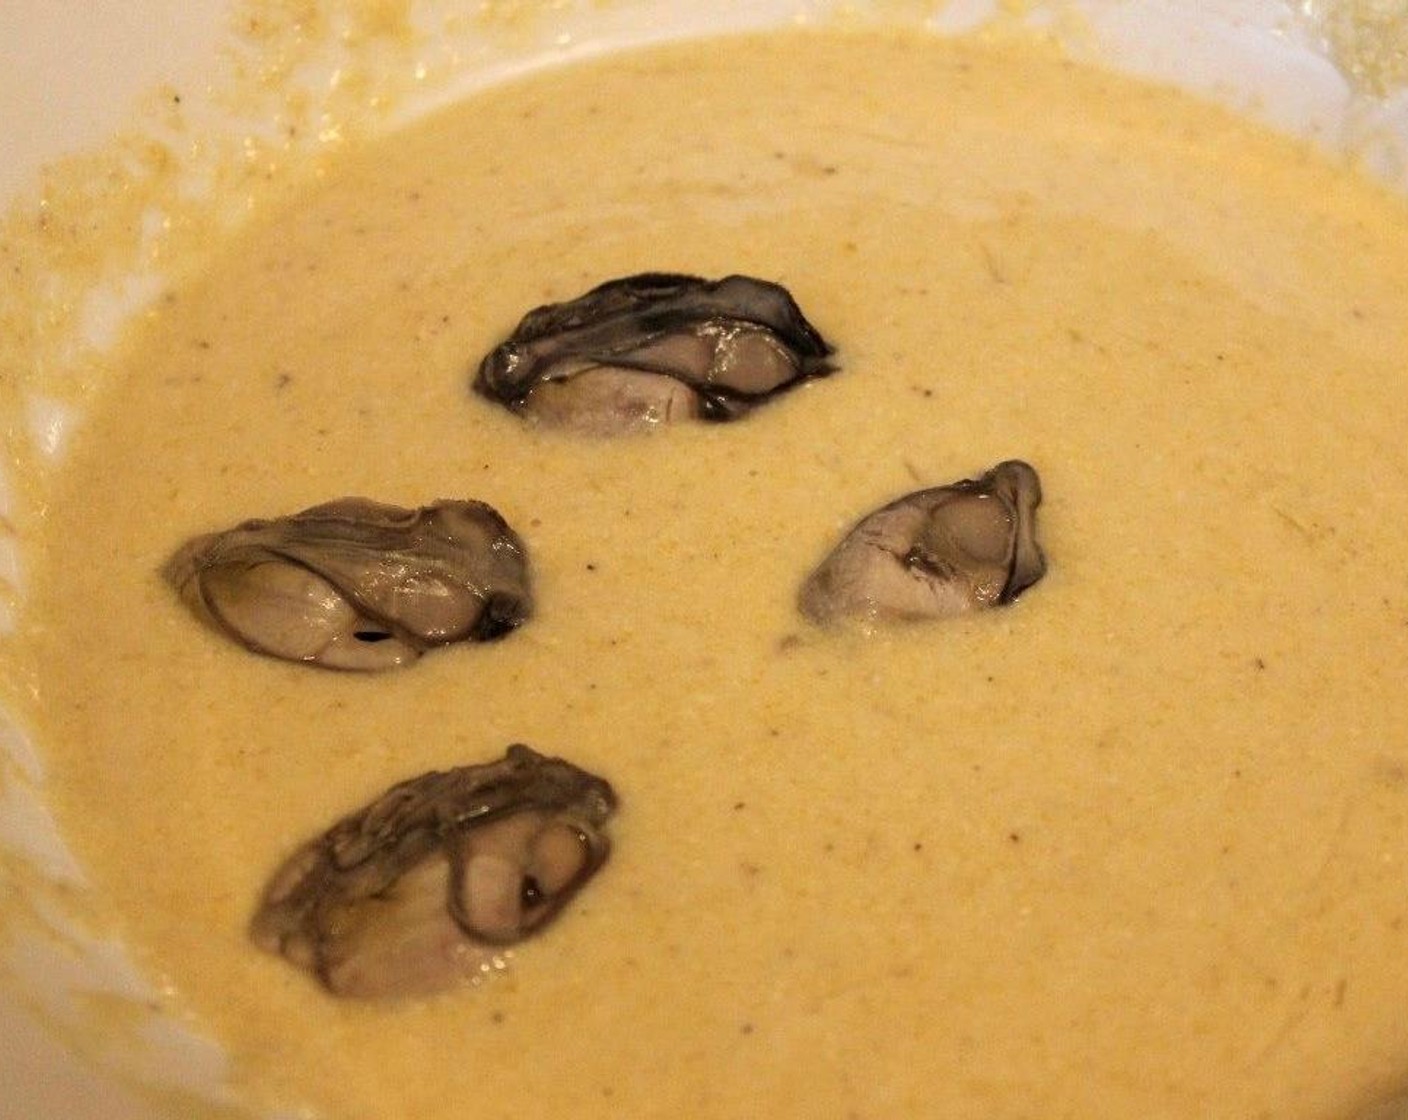 step 5 Evenly coat the oysters in the batter and fry in batches of 4 to 6.